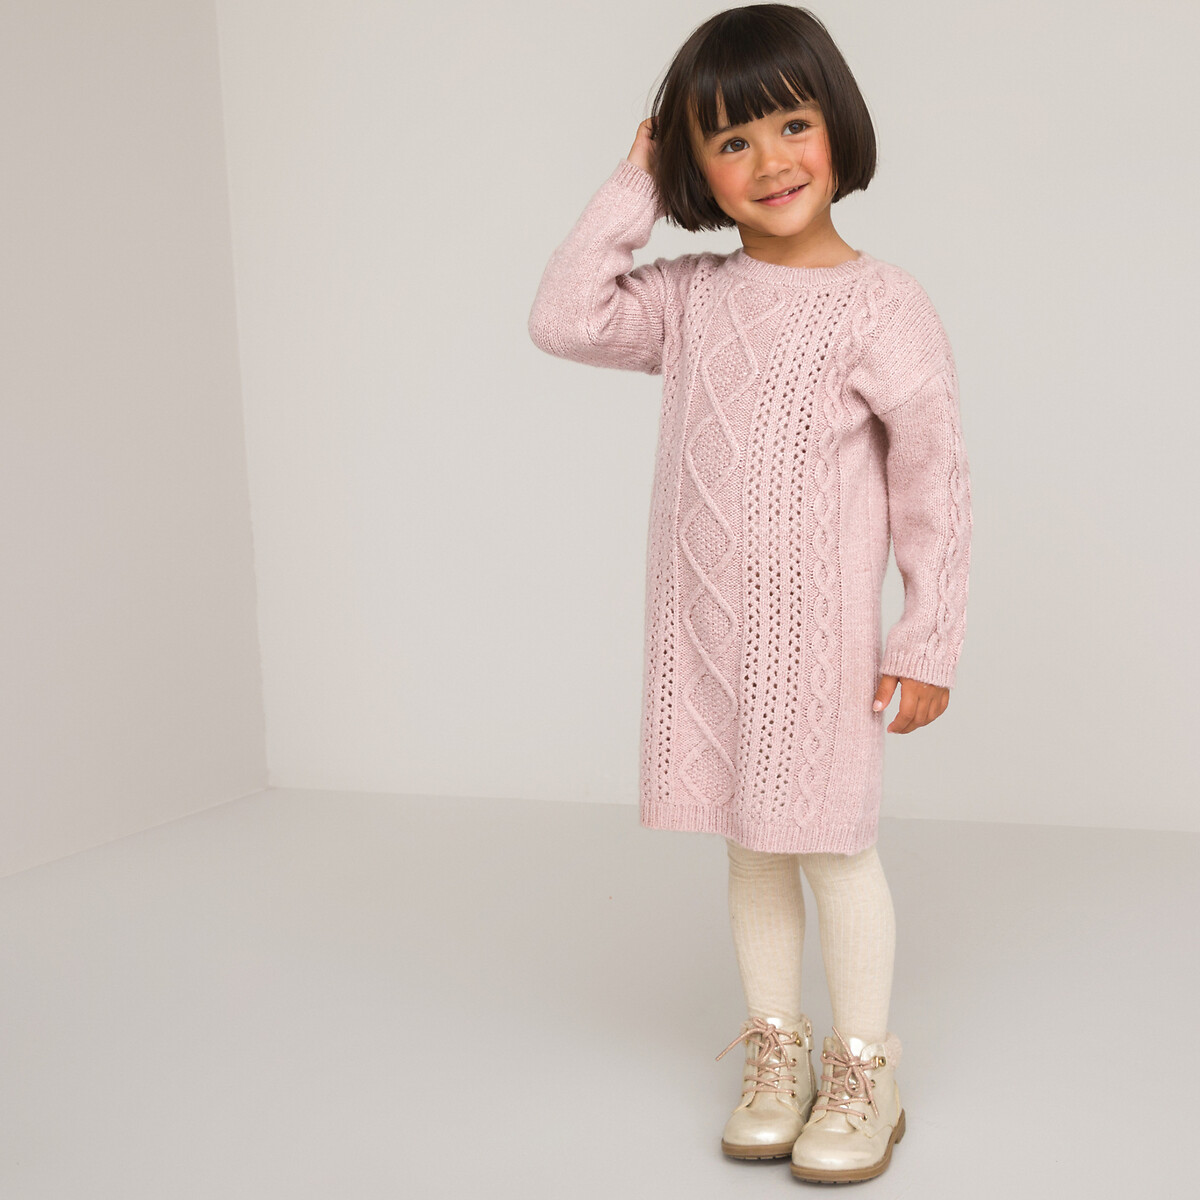 Cable knit jumper dress with long sleeves, pink, La Redoute Collections ...